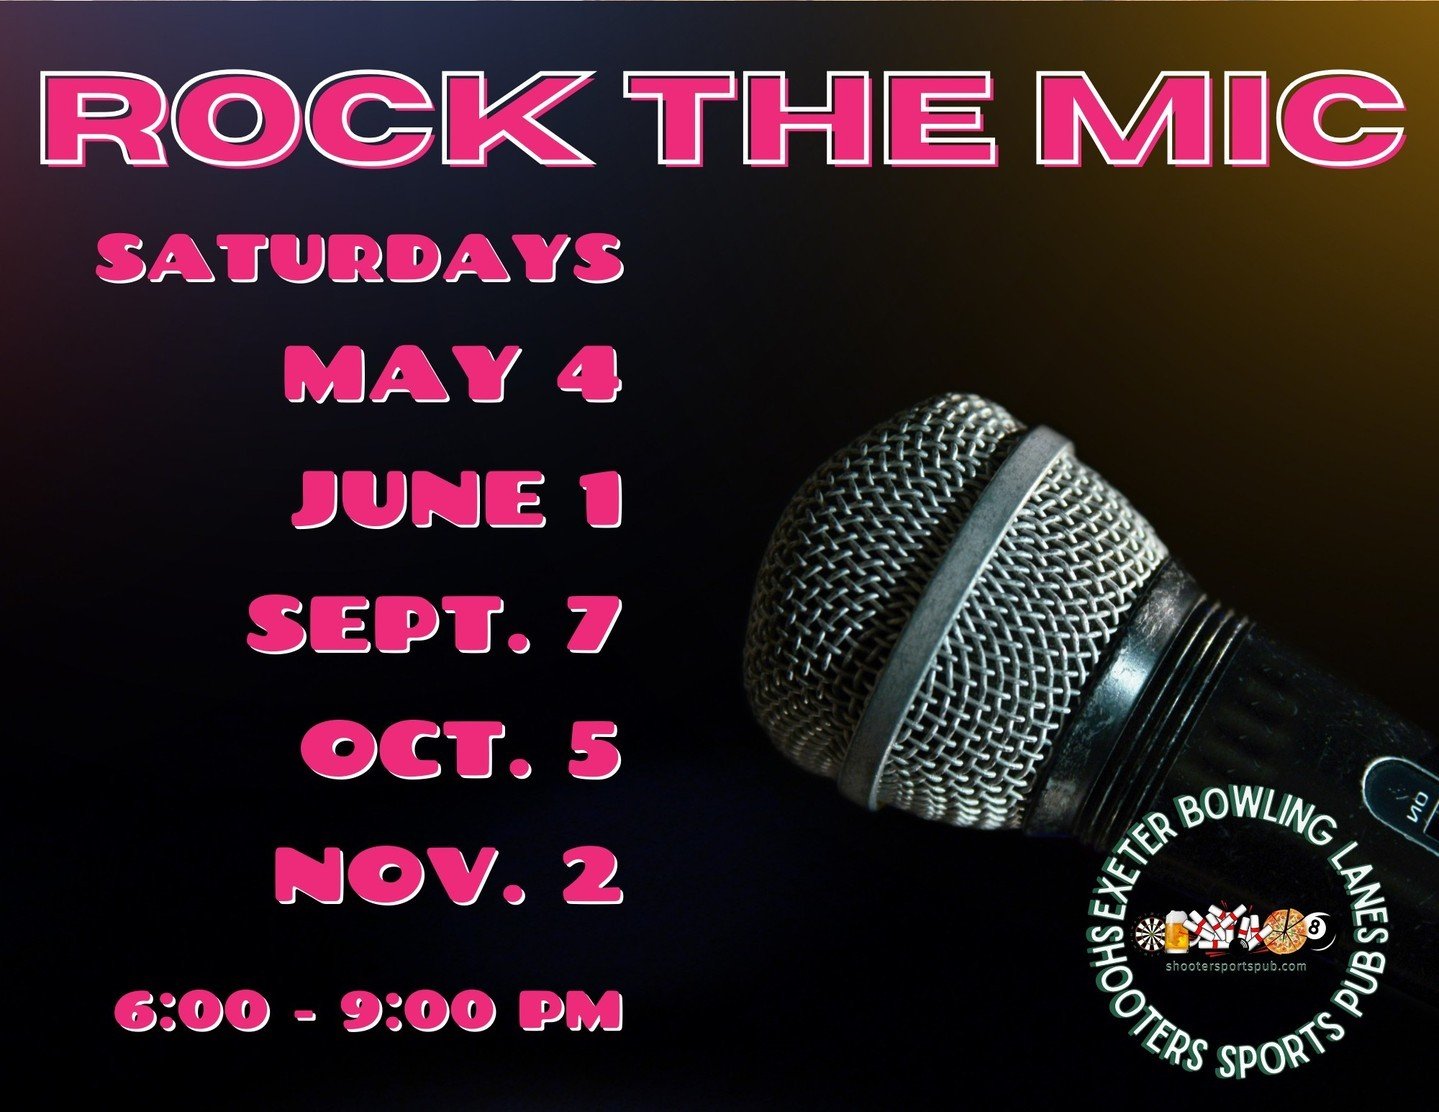 May 4th Rock the Mic *CANCELED DUE TO WEATHER* - See you June 1!